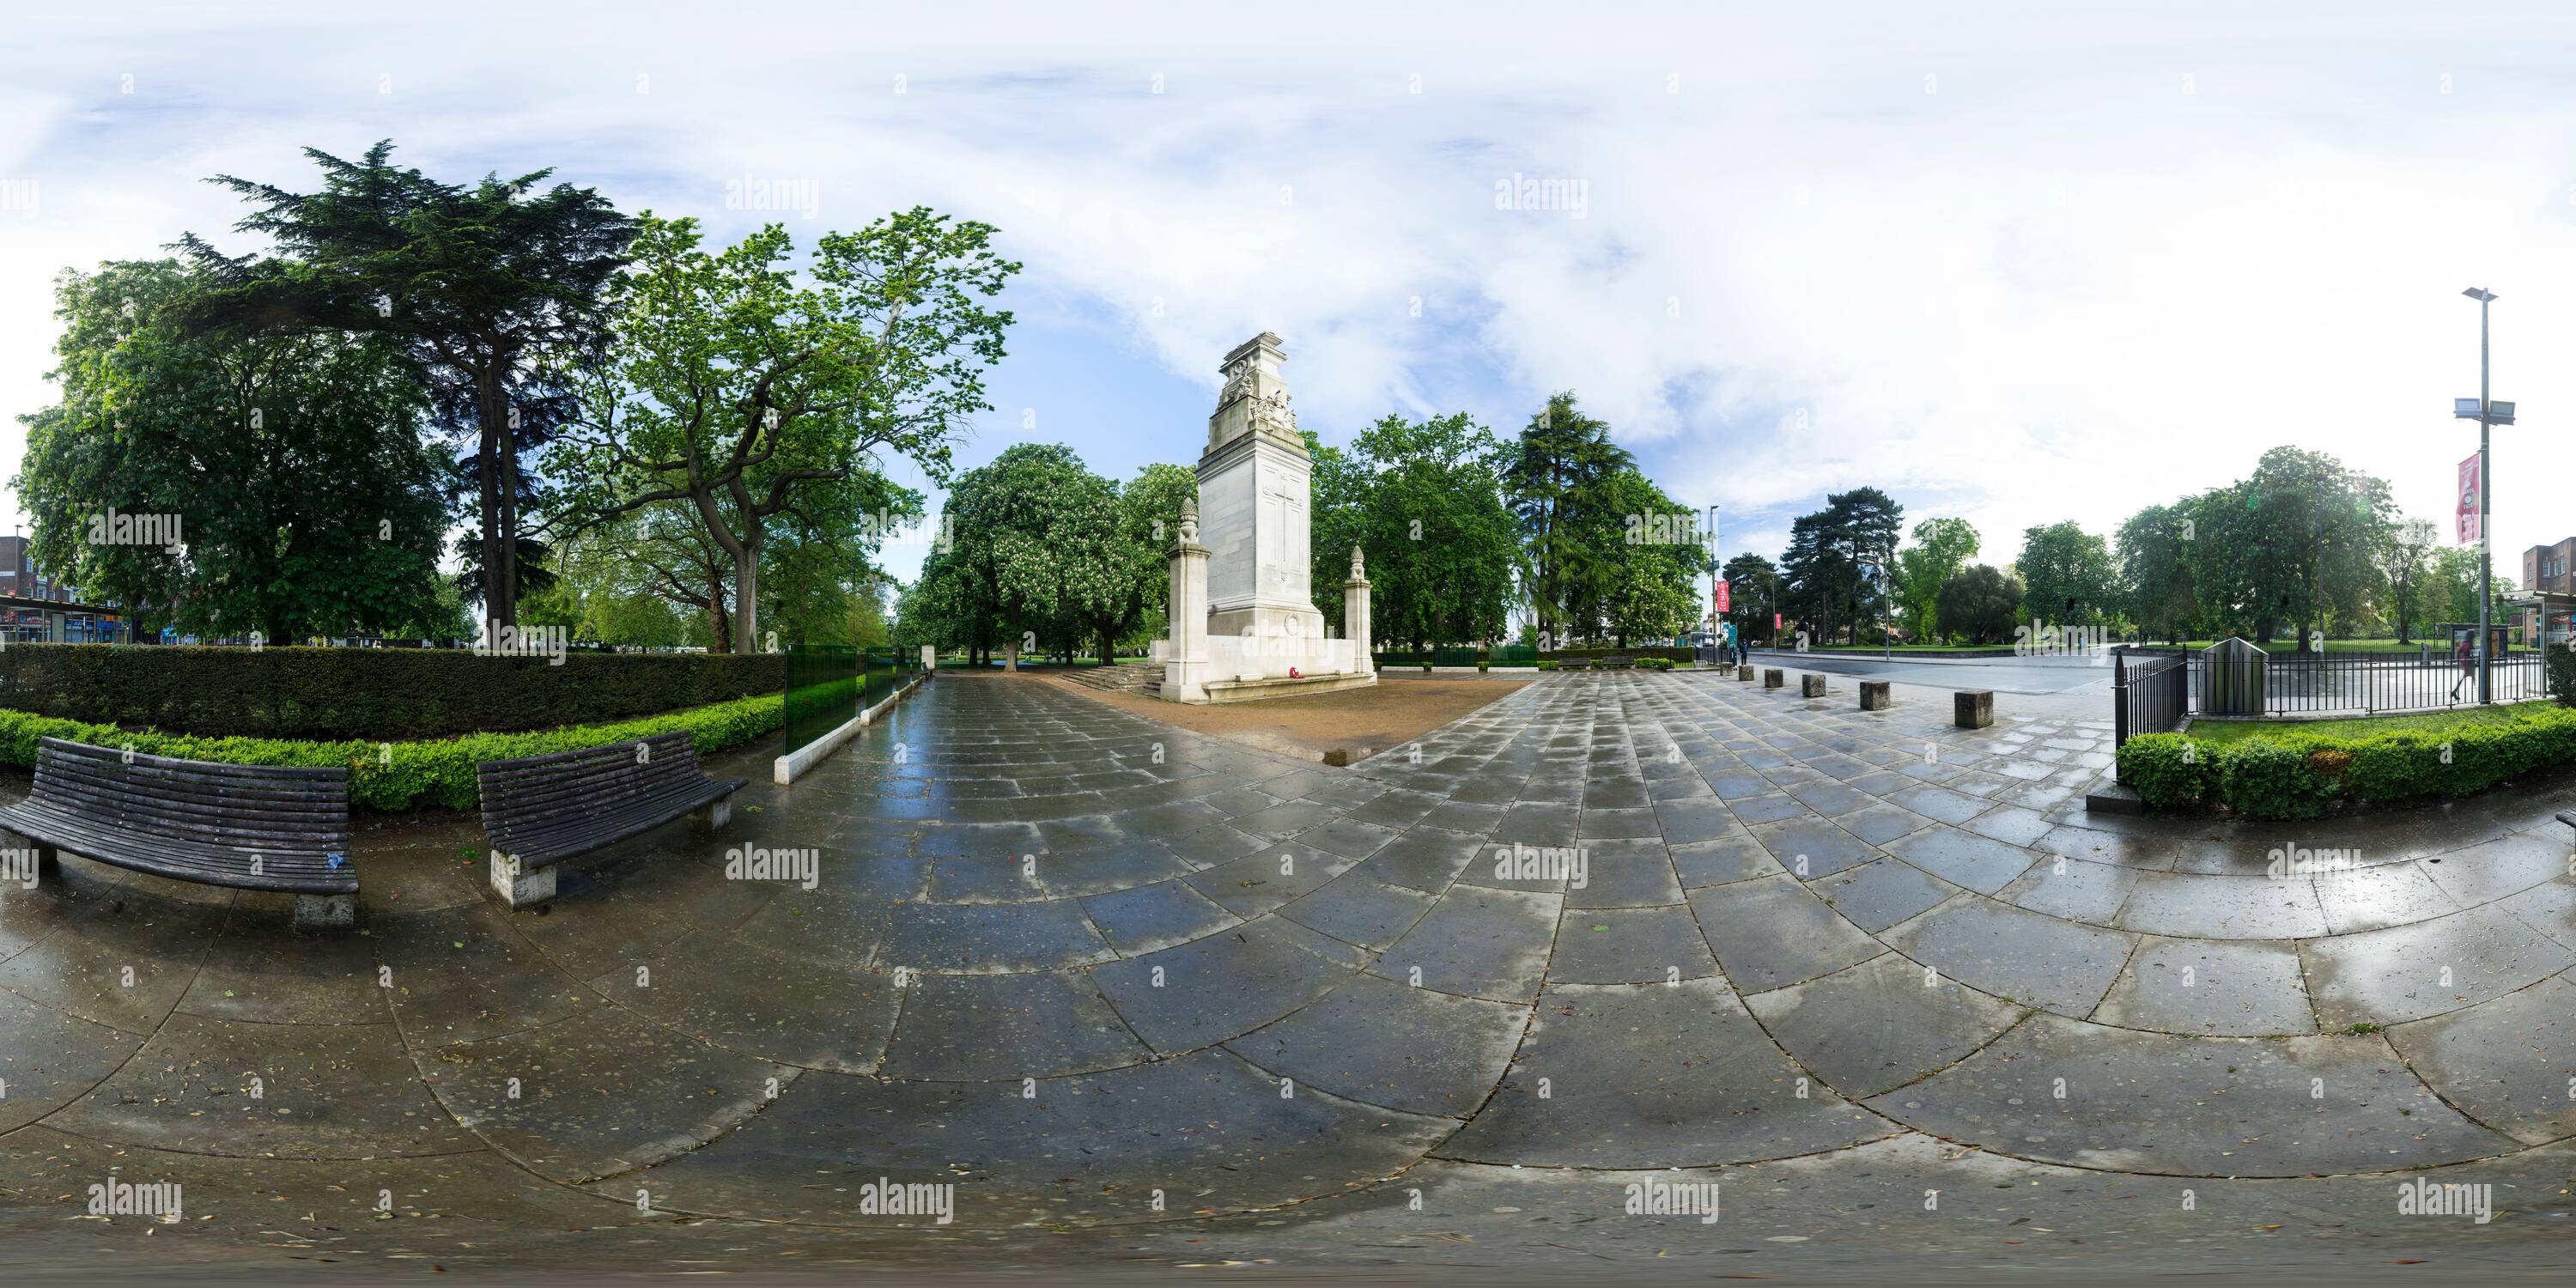 360 degree panoramic view of Southampton's Cenotaph in Watts Park was the first of many designed by Sir Edwin Lutyens as a memorial to those killed in the First World War